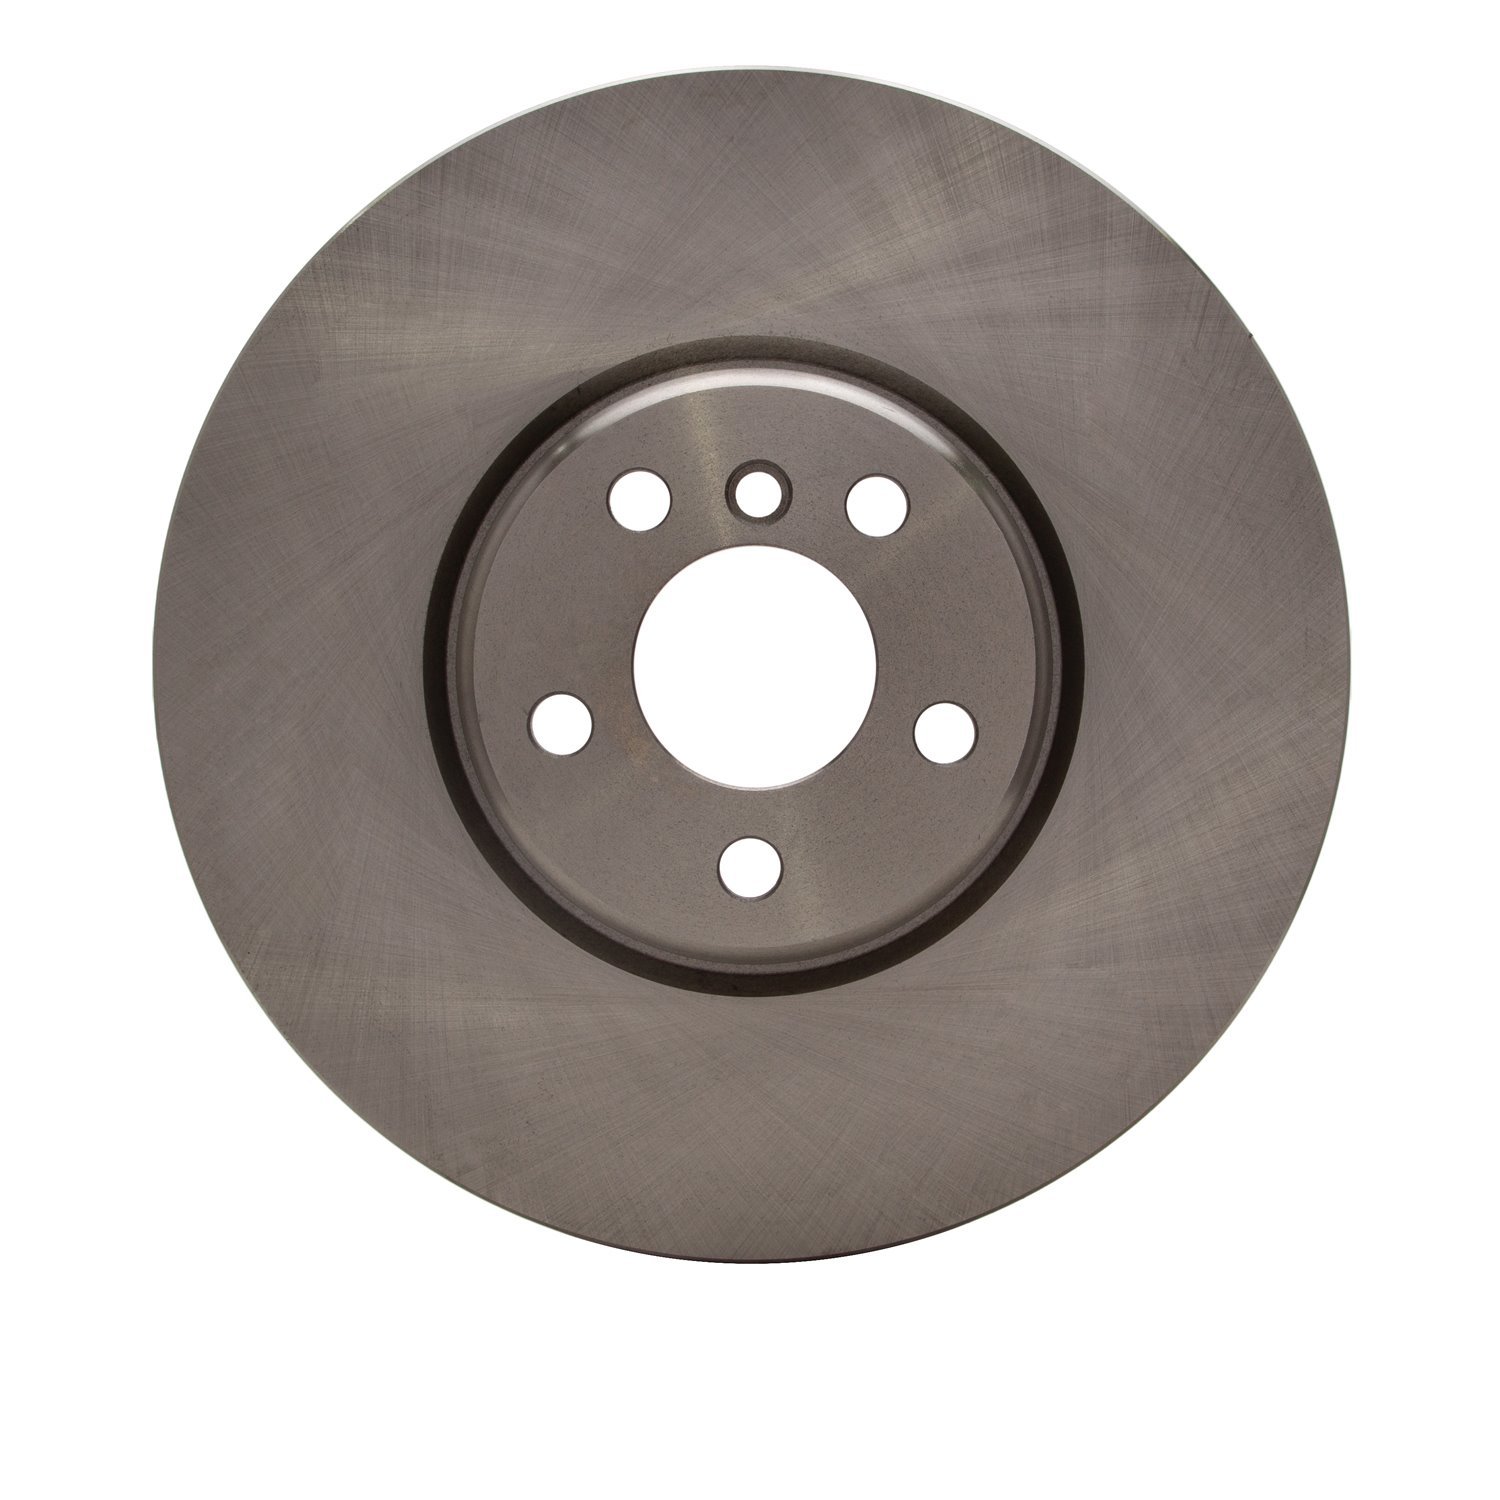 E-Line Blank Brake Rotor, Fits Select Fits Multiple Makes/Models, Position: Right Front